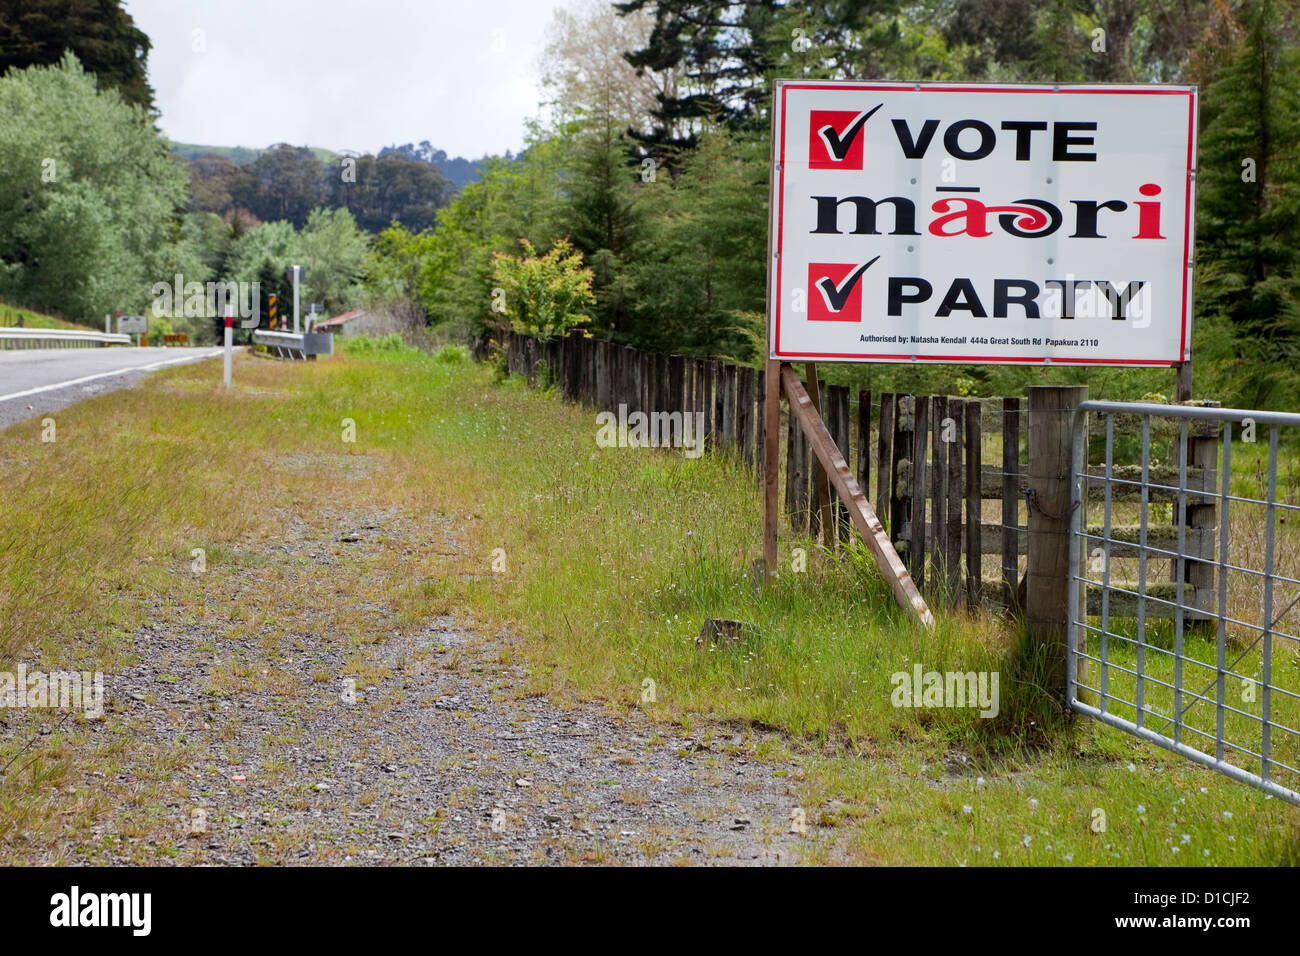 Political Poster for Maori Political Party Alongside Highway, northern island, New Zealand. Stock Photo